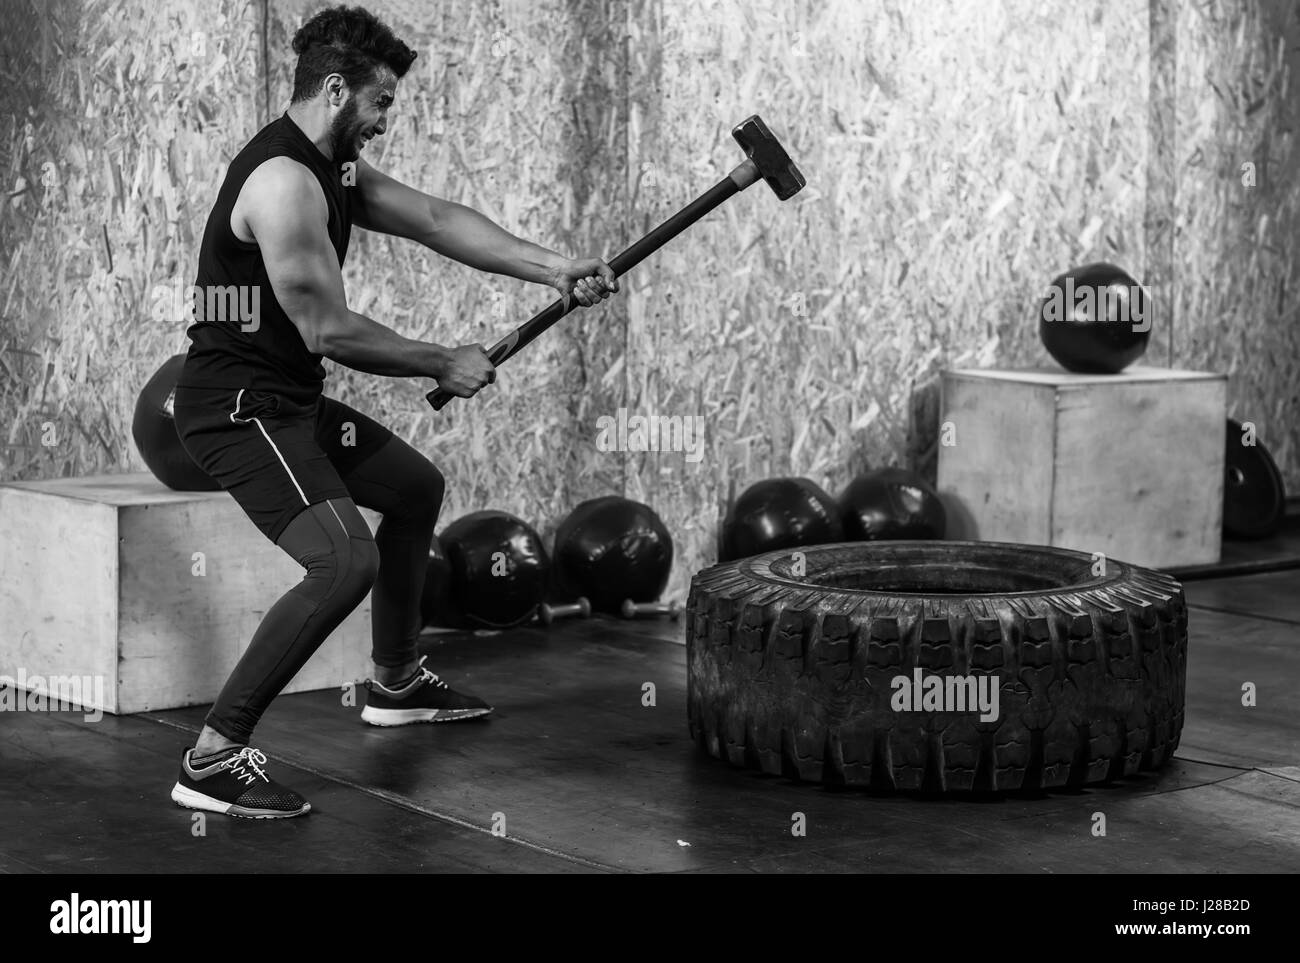 Crossfit Sledge Hammer Man Workout Stock Photos & Crossfit Sledge ...